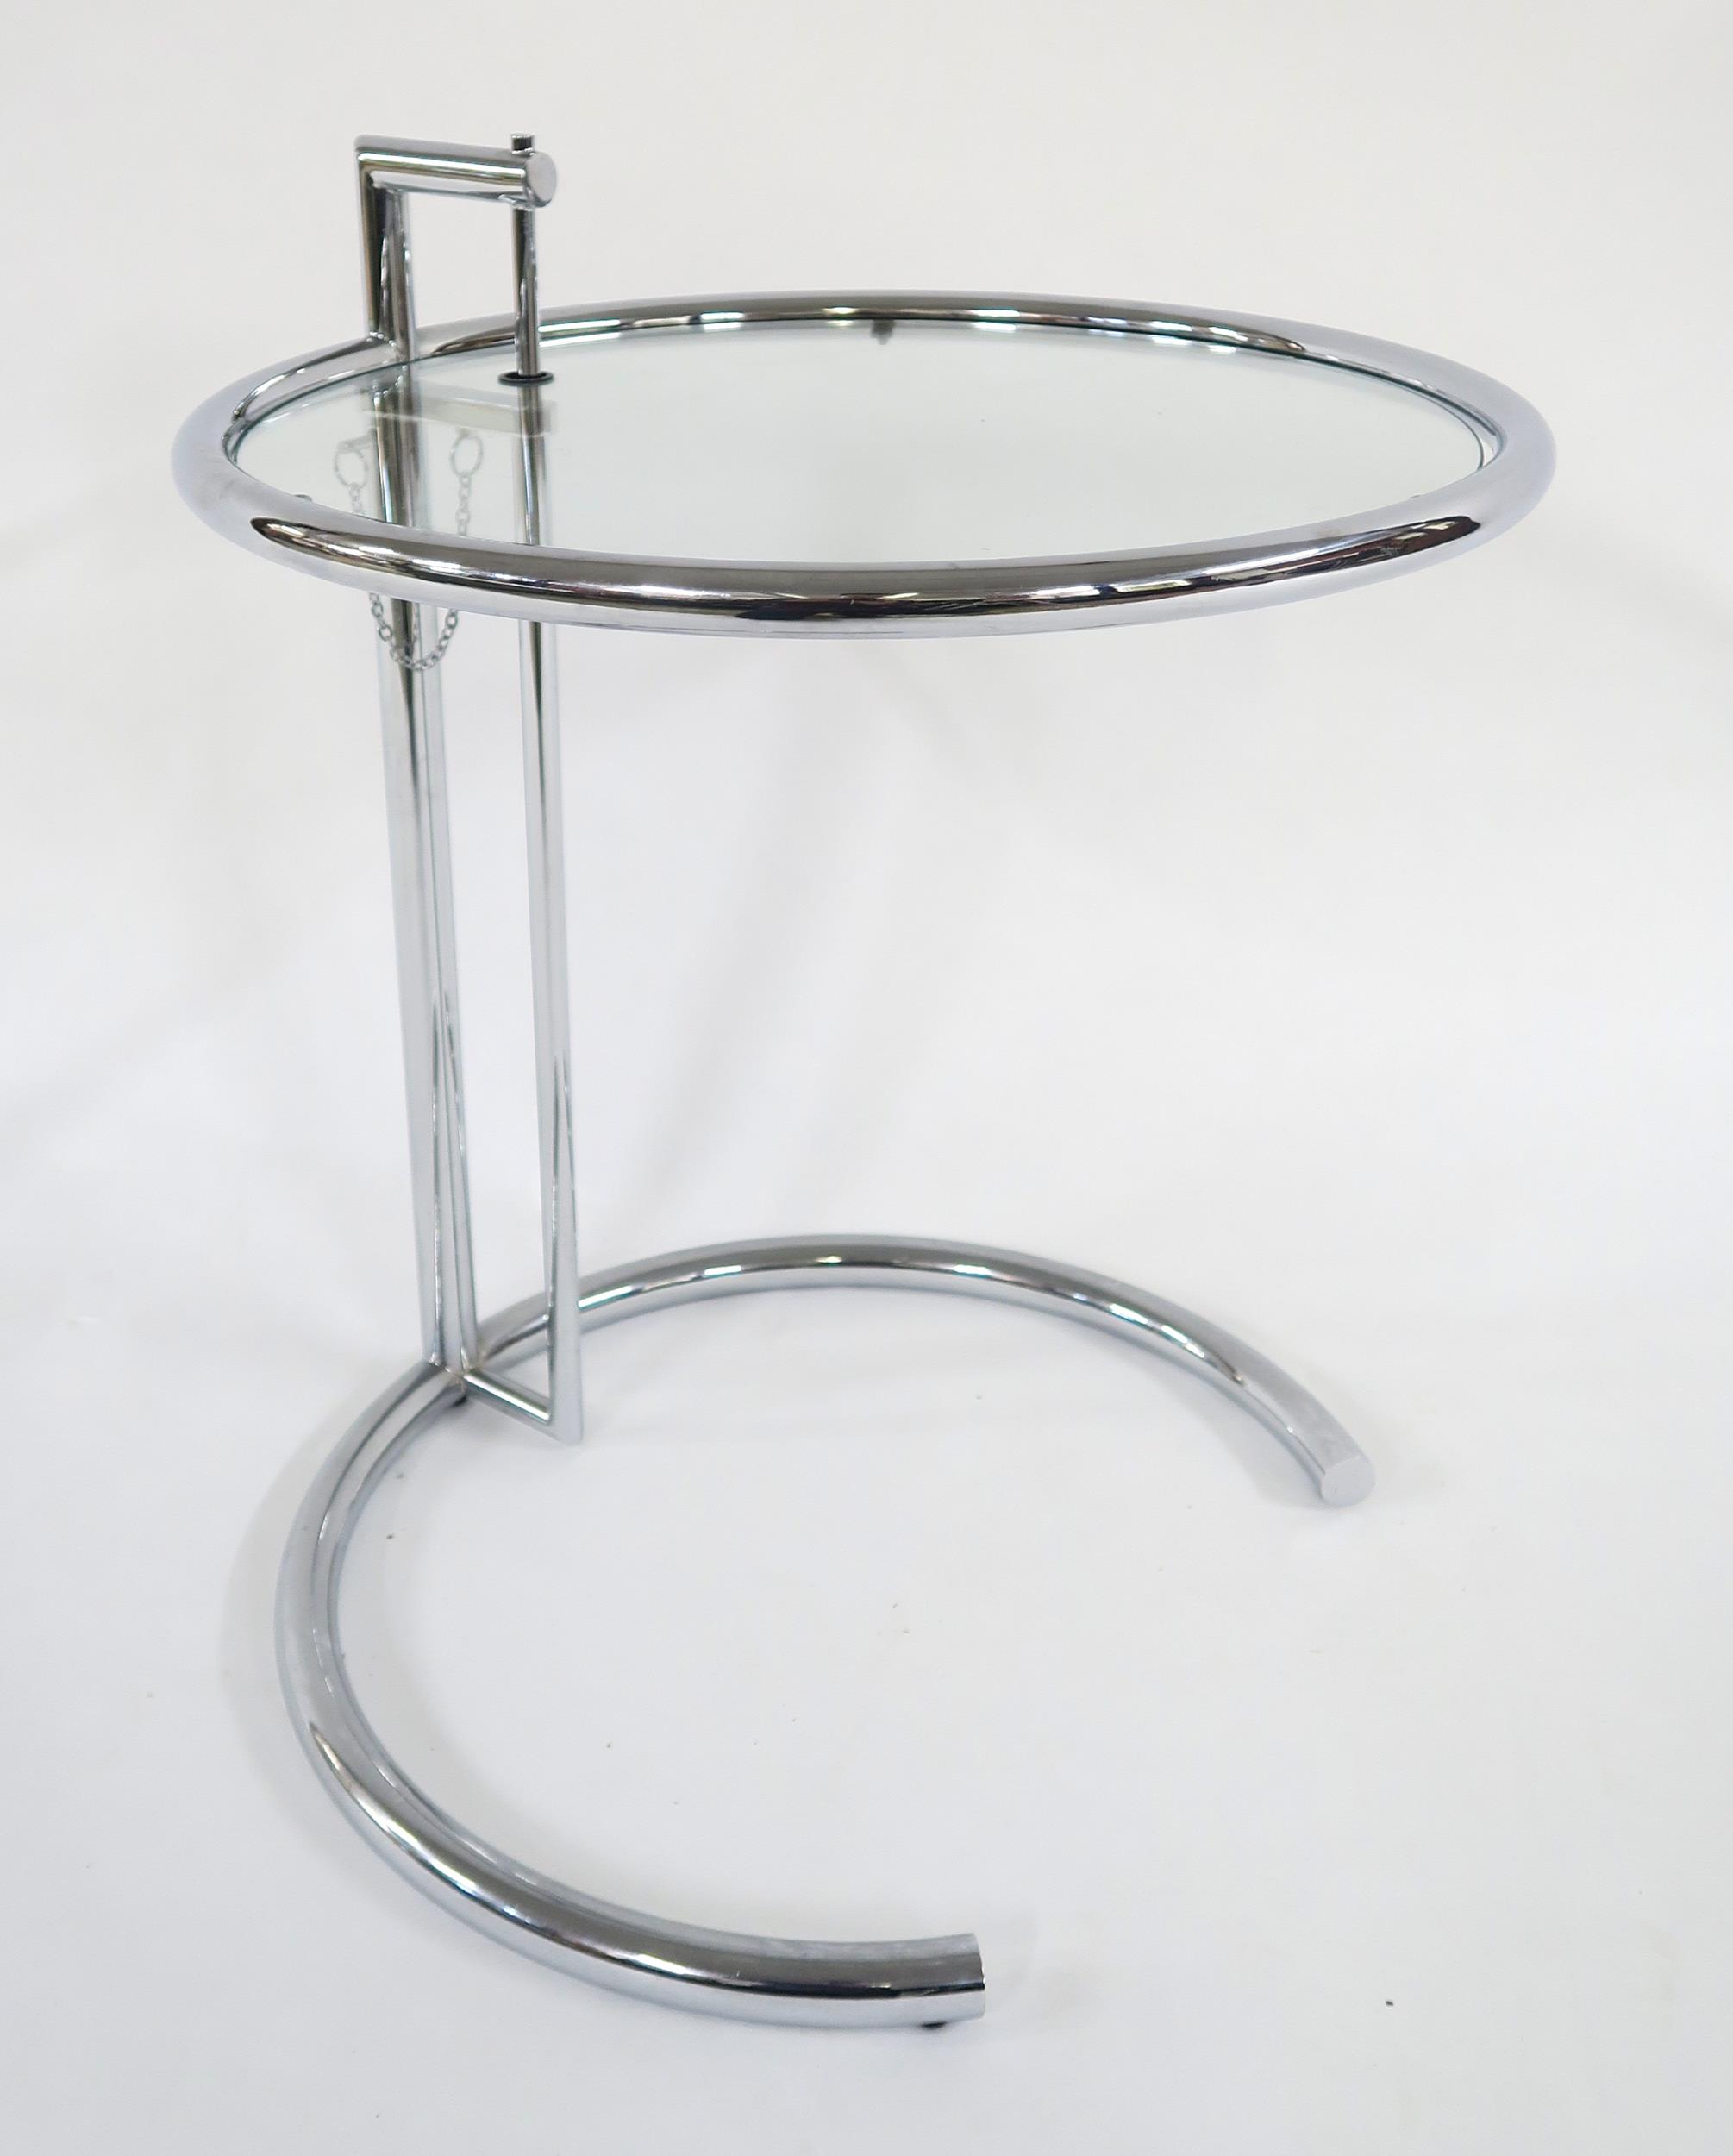 A MID 20TH CENTURY AFTER EILEEN GRAY E-1027 ADJUSTABLE TABLE with circular glass table top on